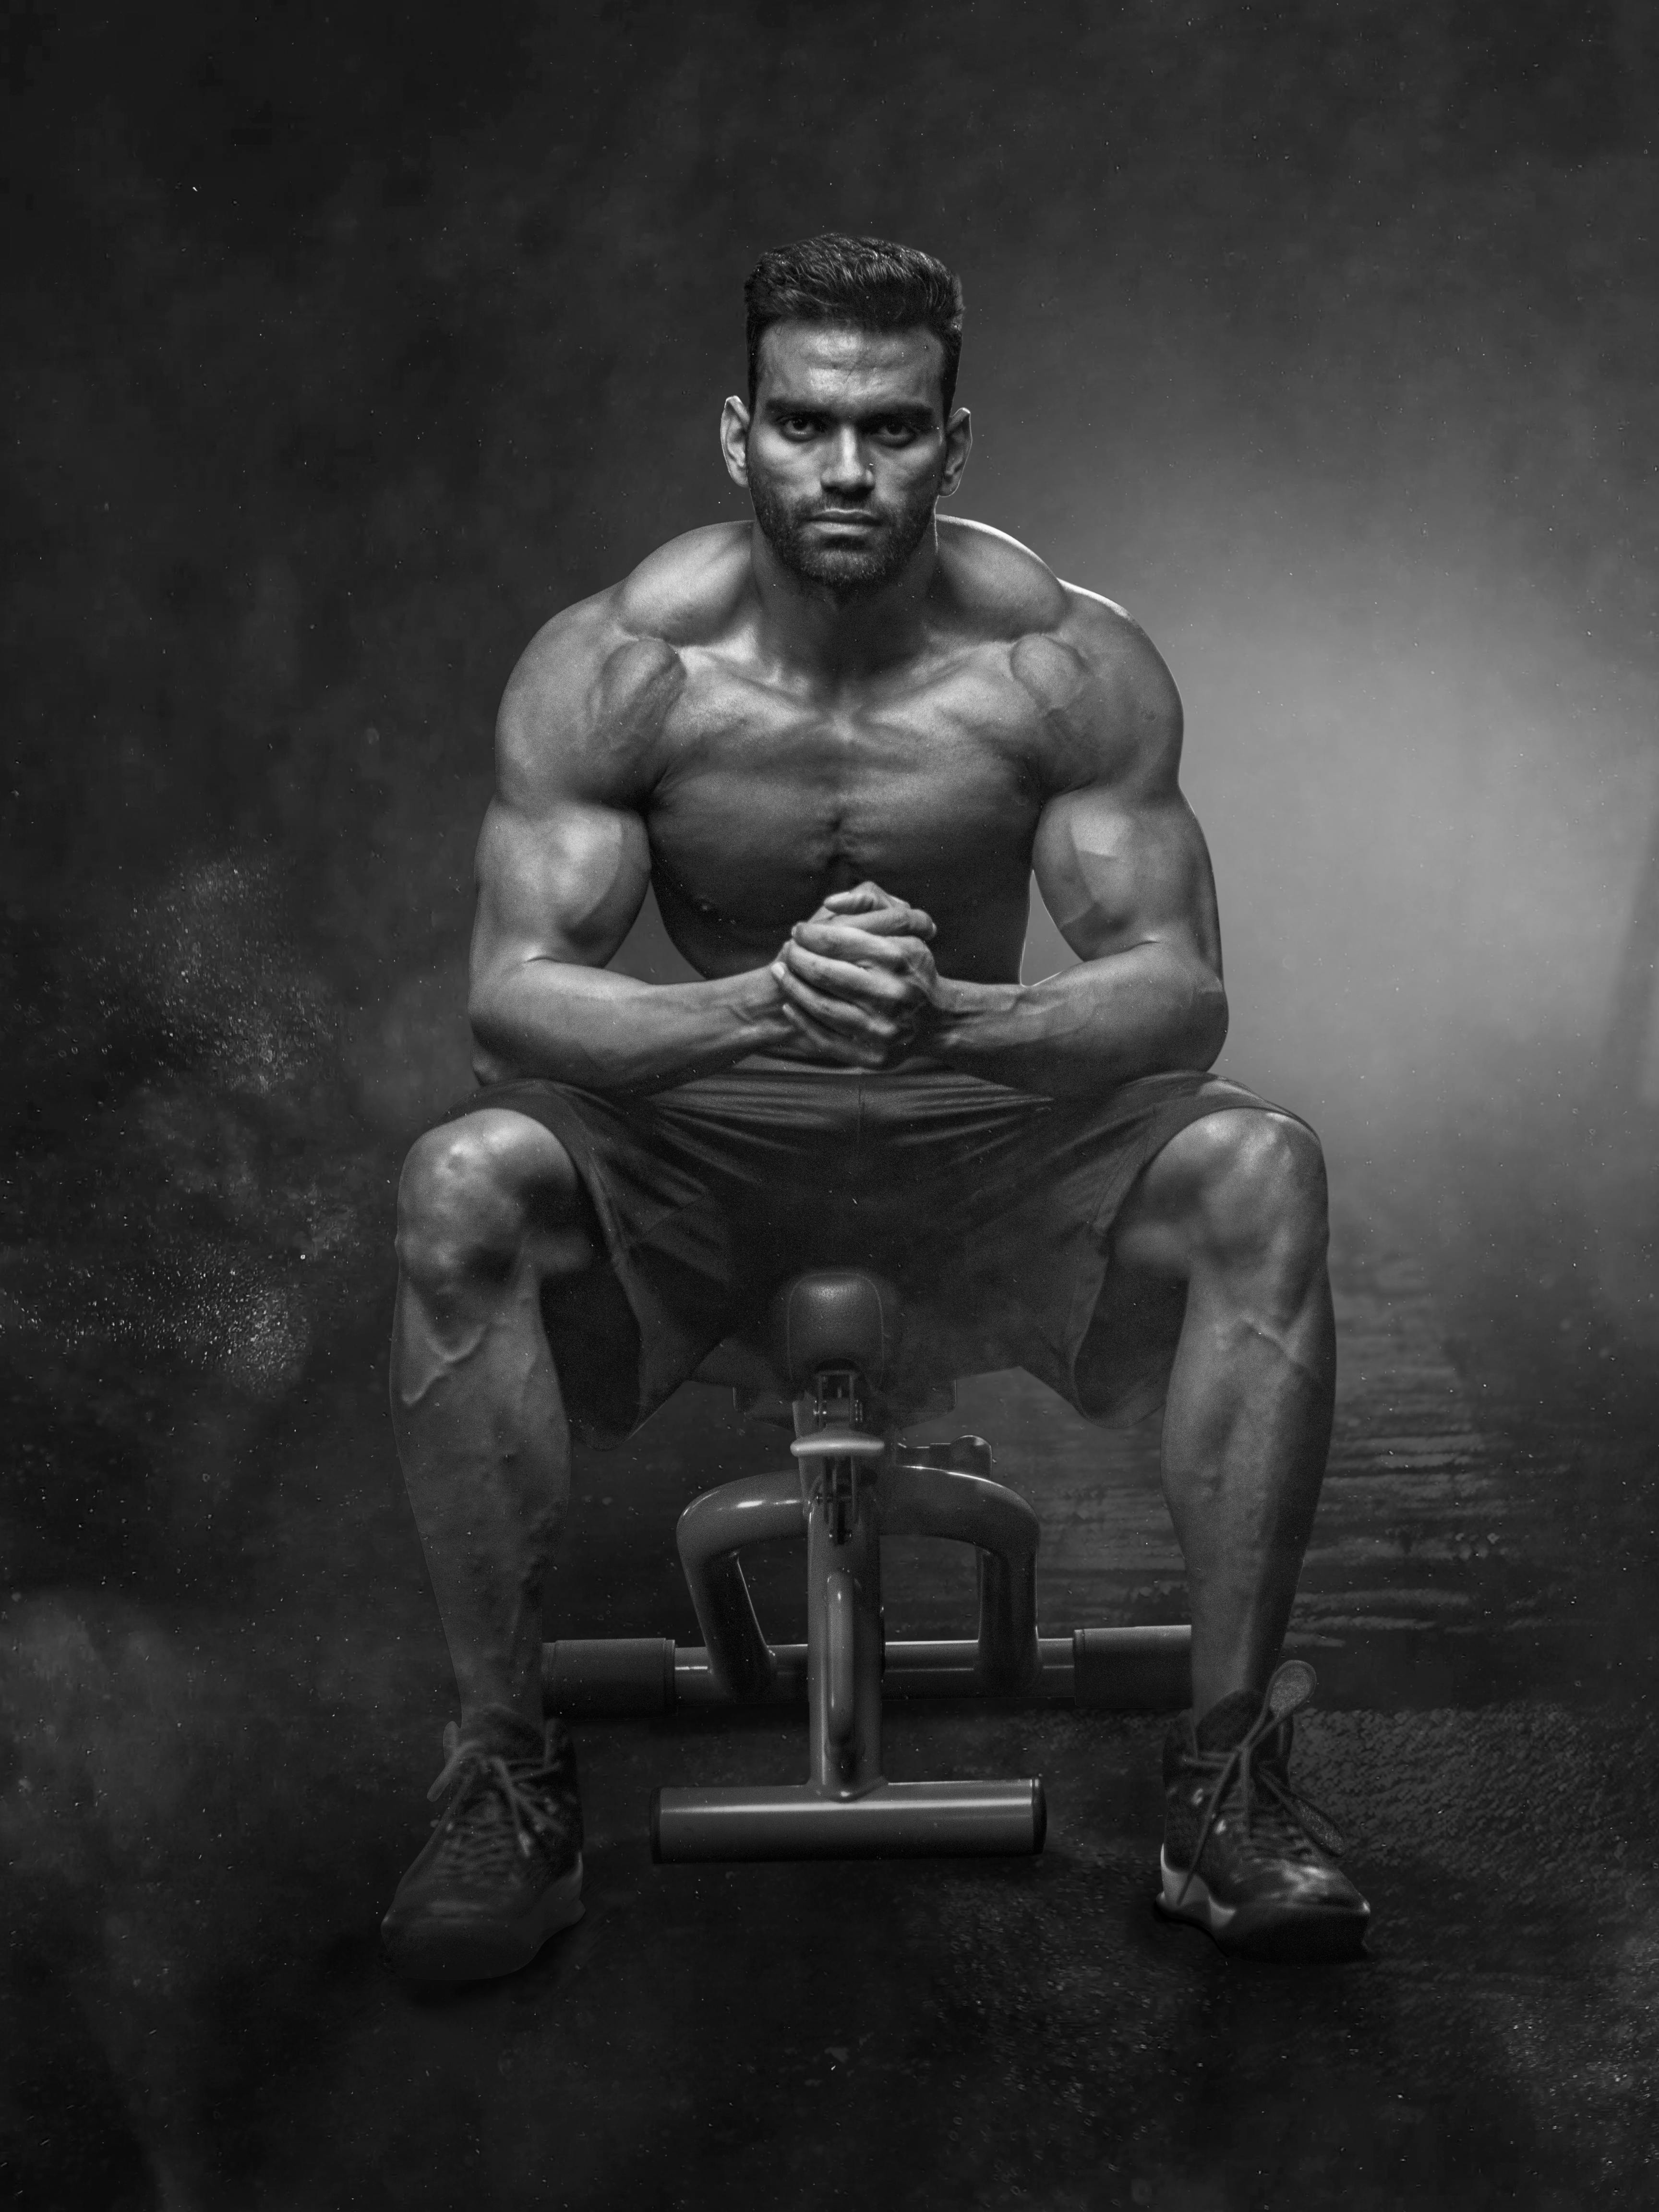 Strong Muscular Image & Photo (Free Trial)